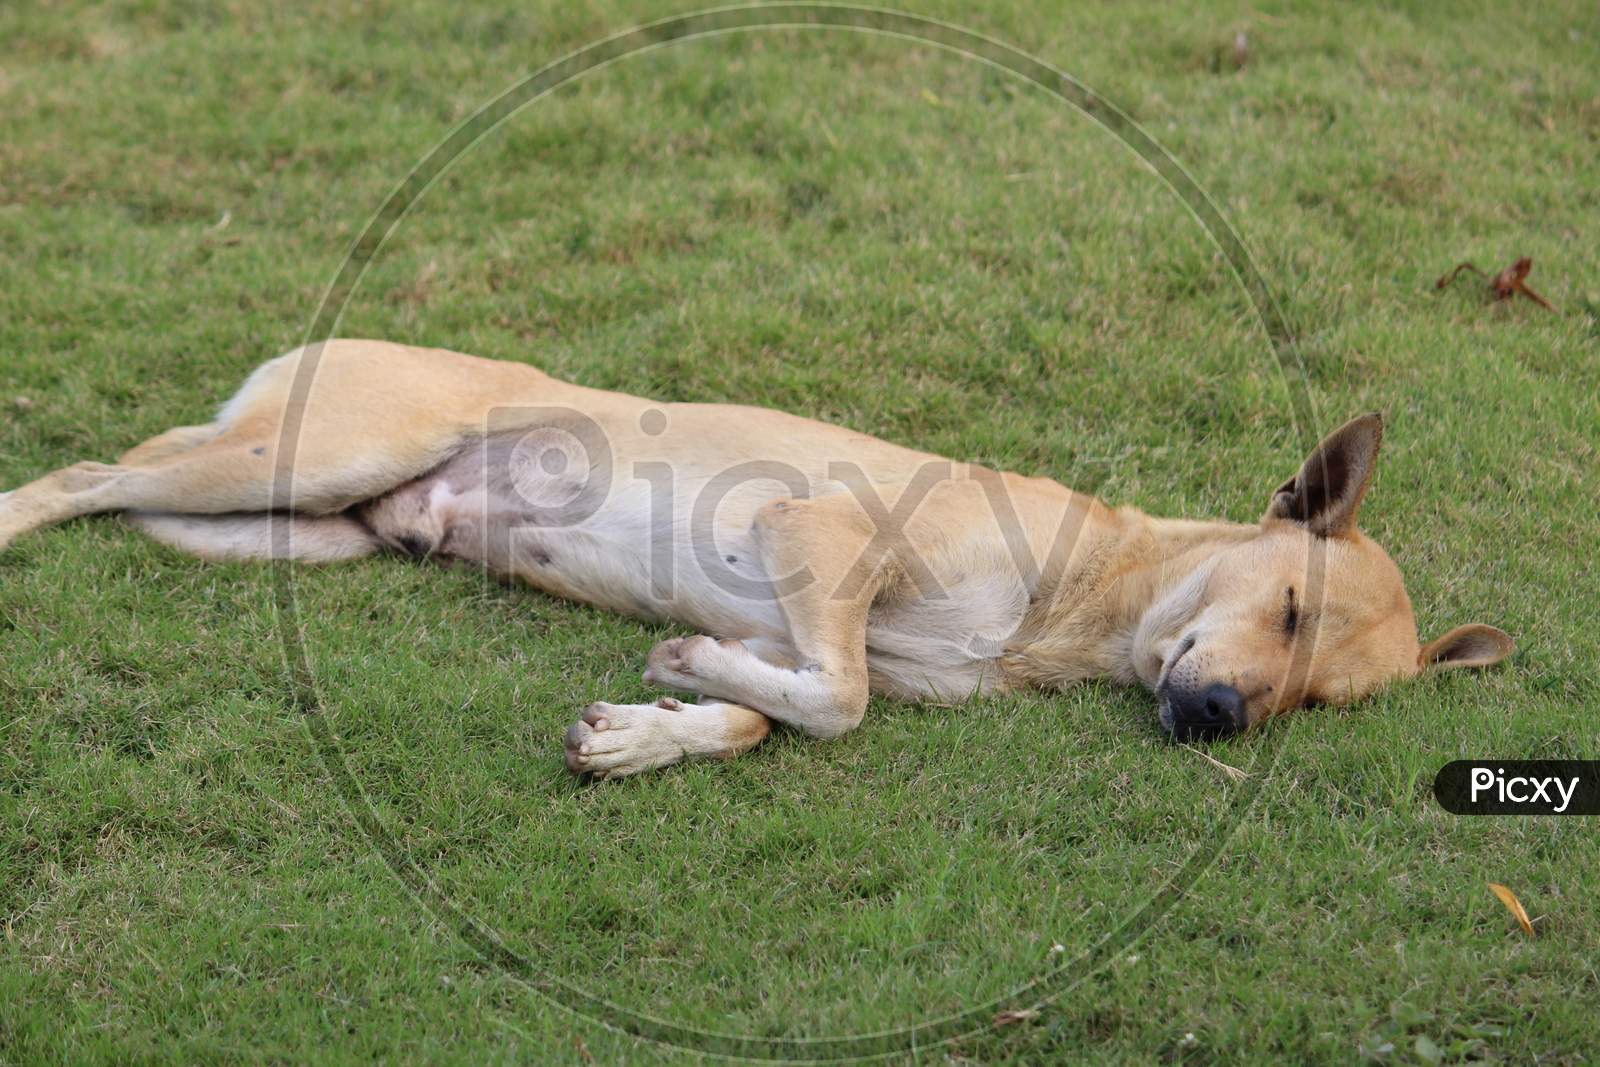 Indian pariah dog or Indian native dog or Indian street Dog is sleeping and resting on a soft green grass on a sunny day.